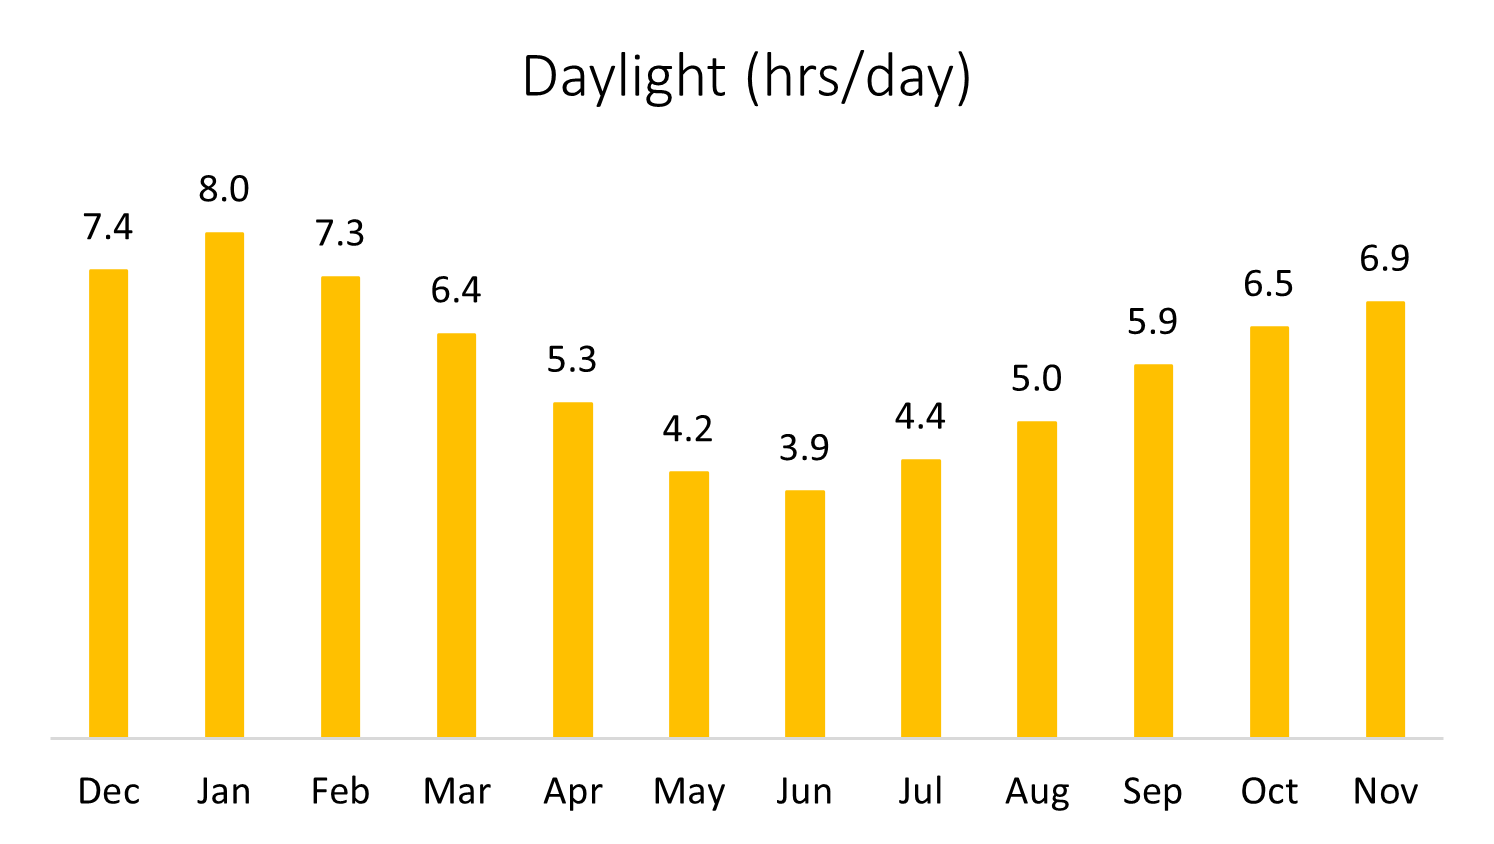 Graphical representation of daylight (hrs/day) for Hobart, Australia